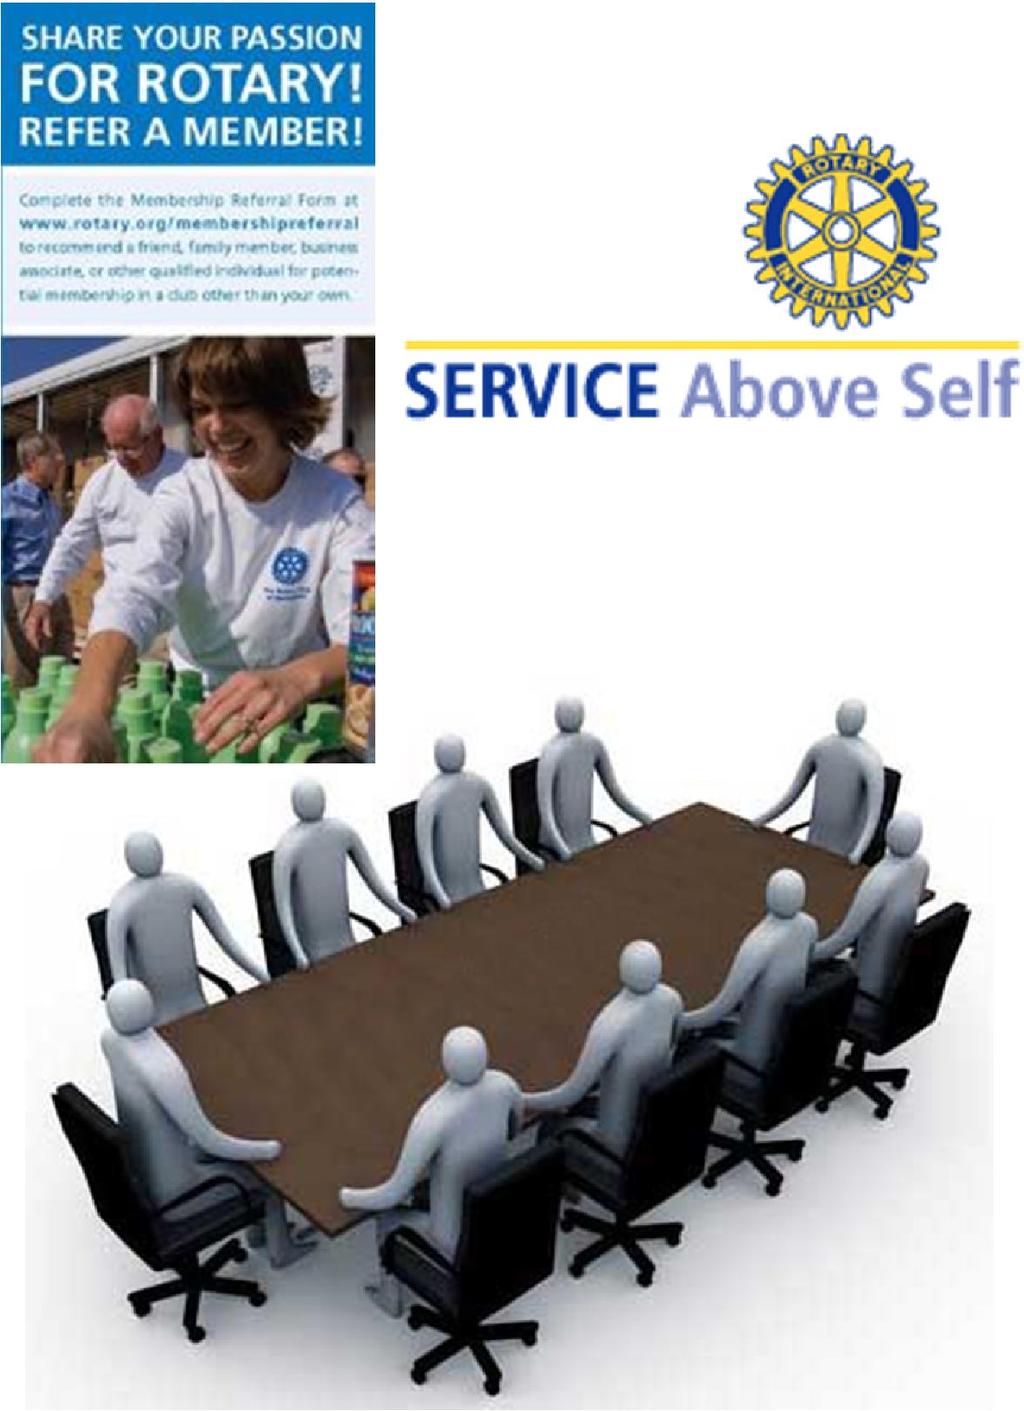 Invite a guest to a Rotary meeting 5. Propose a new member 6.